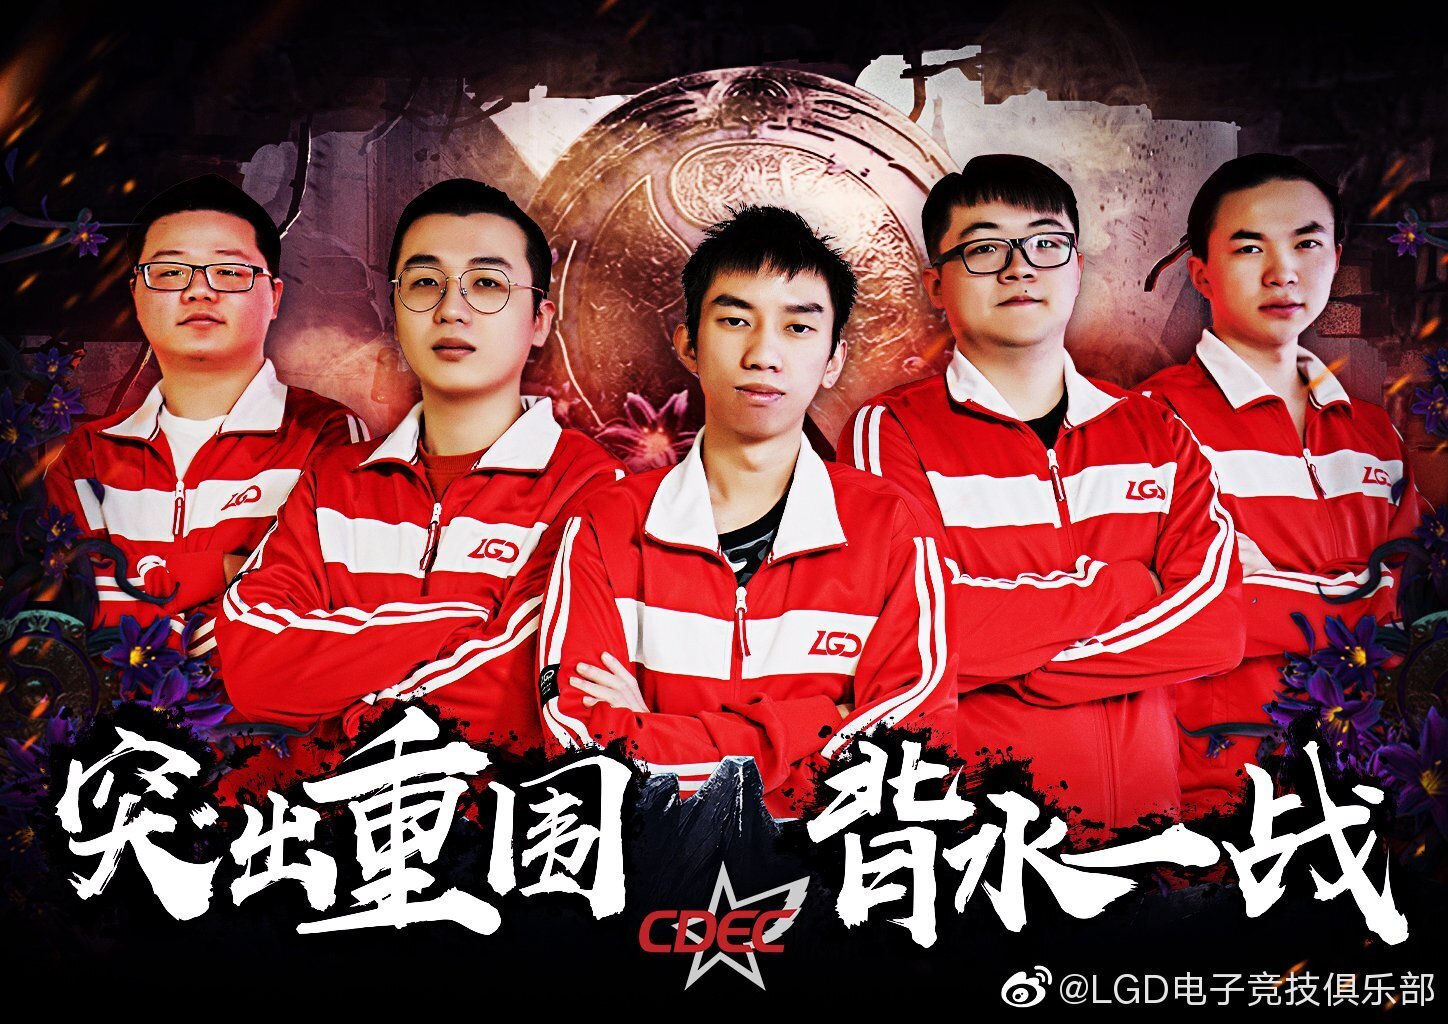 CDEC emerged victorious from a three-way tie to claim third place in the TI9 China qualifiers.